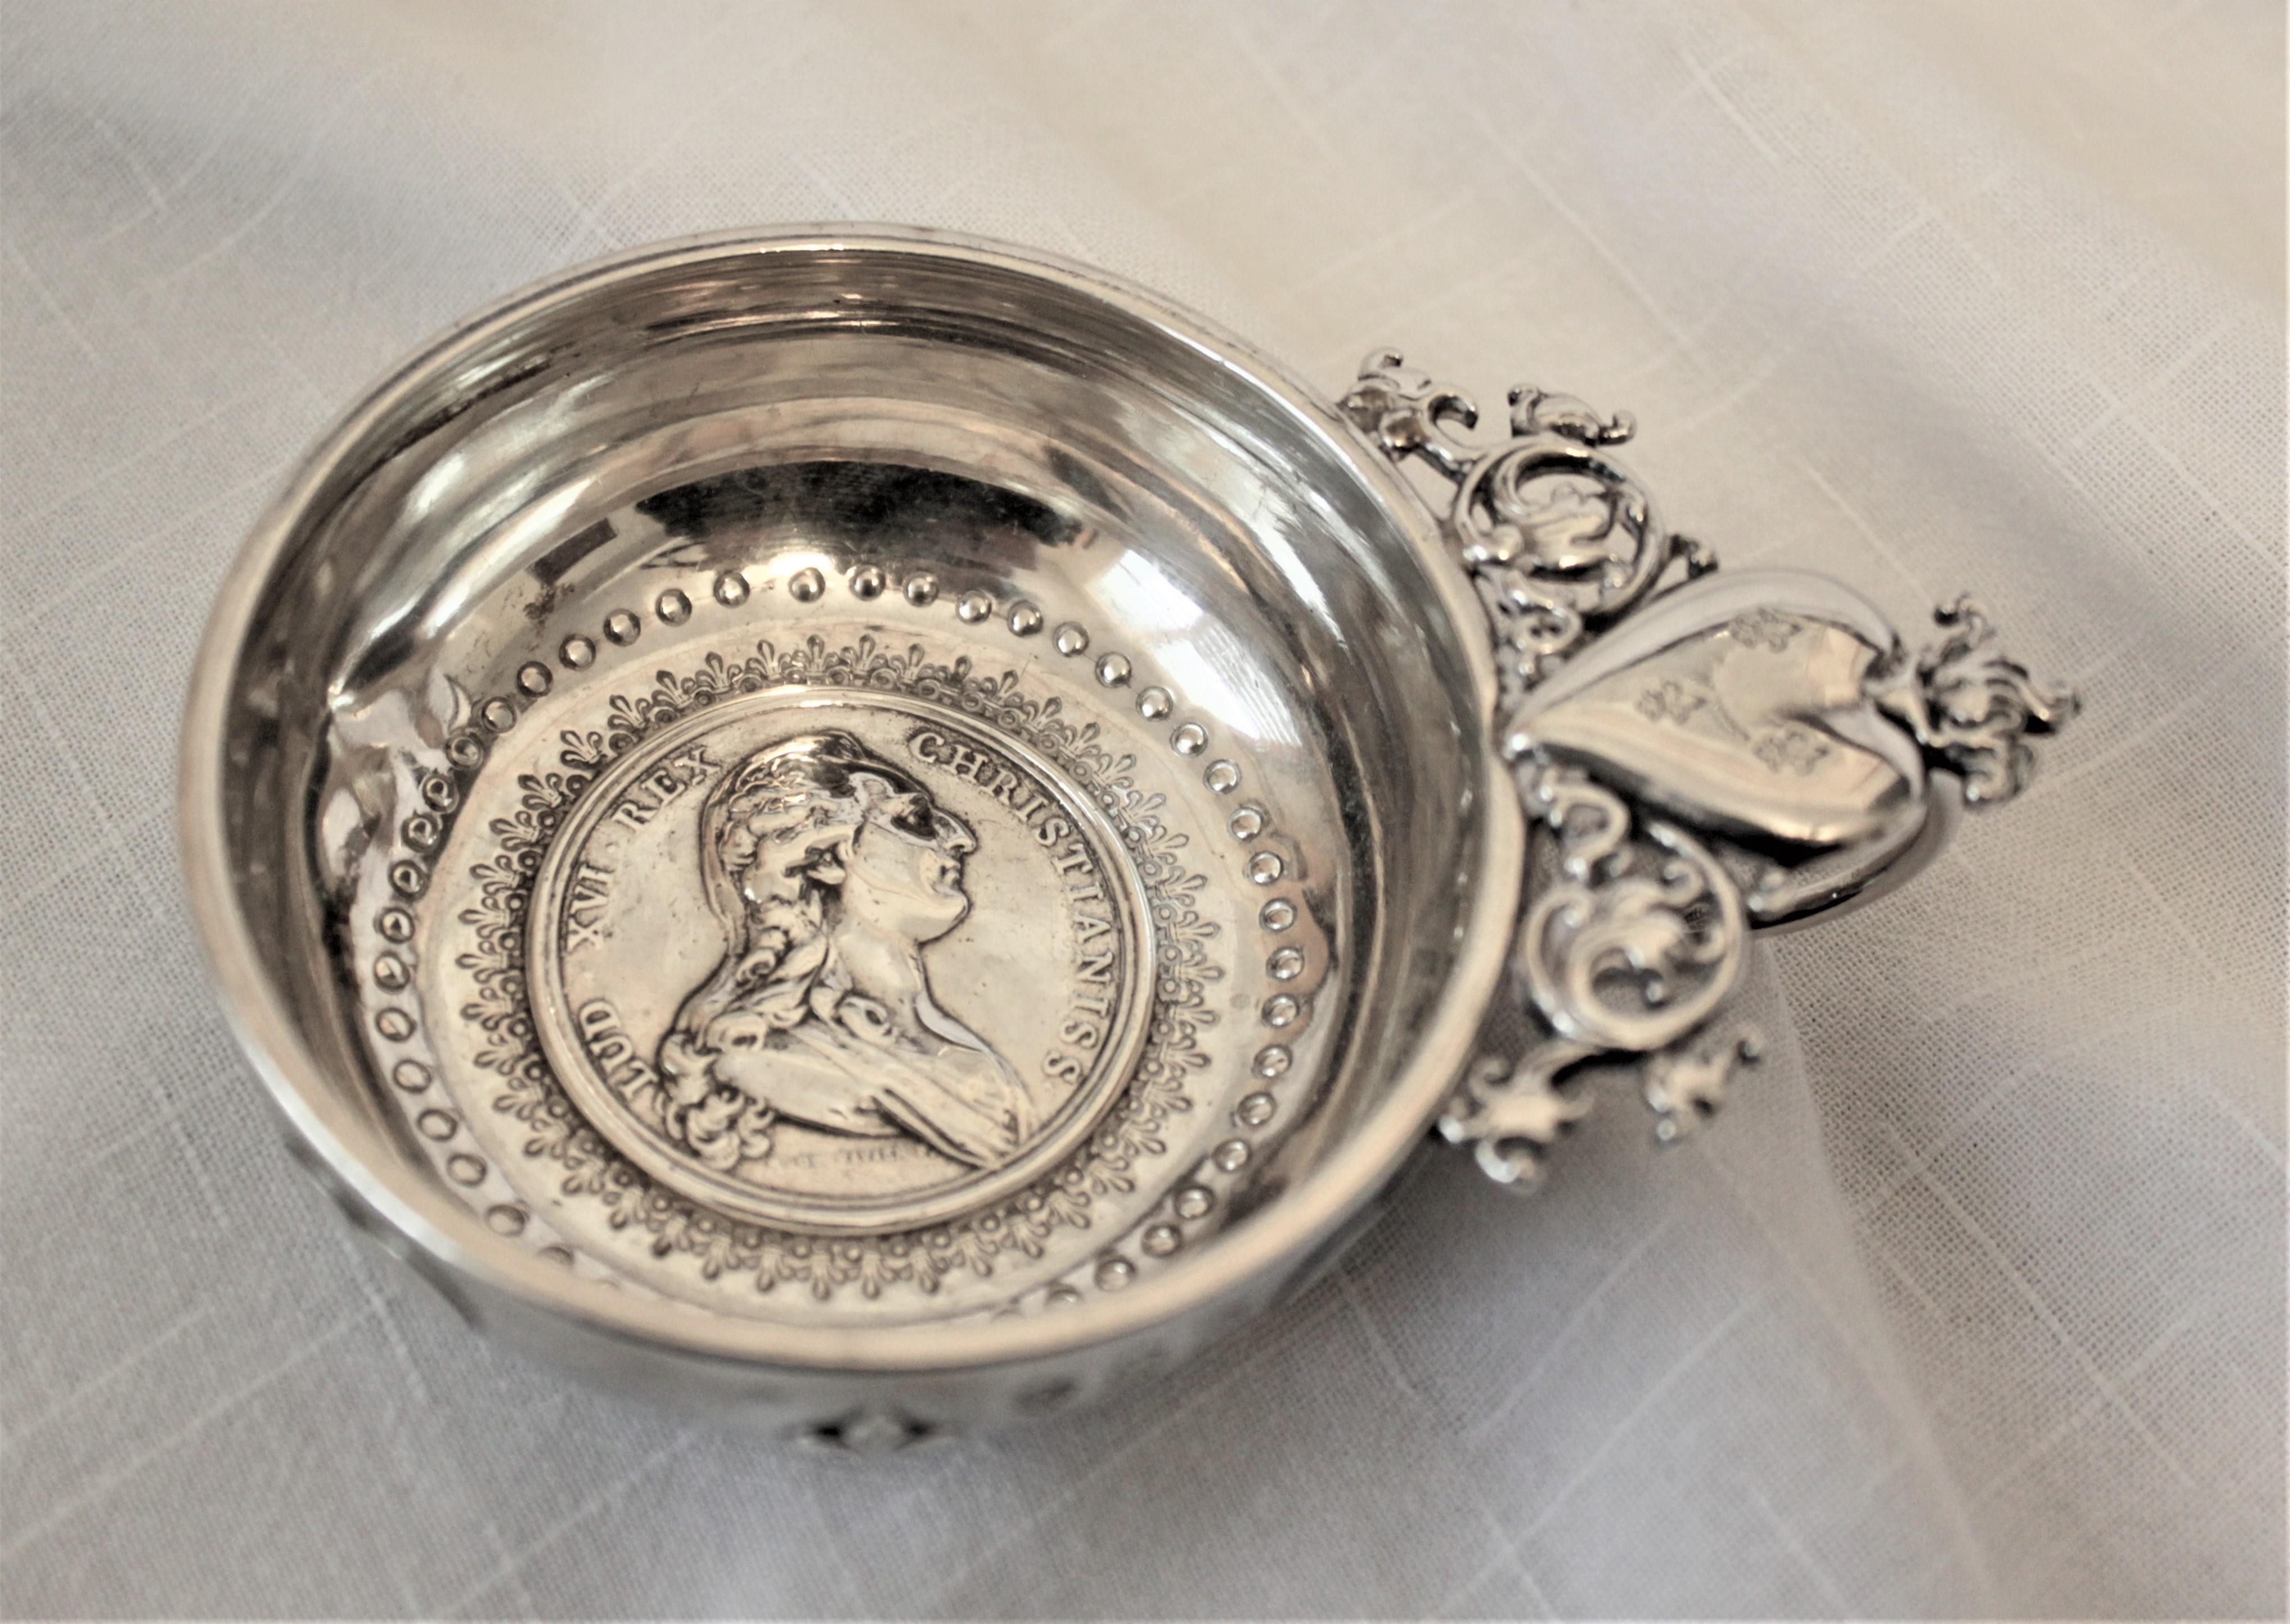 This very unique and ornate antique silver wine taster was made in France in circa 1780 and is hallmarked, however the maker cannot be identified so is being deemed 'unknown'. The wine taster is very intricately decorated with chased hearts around